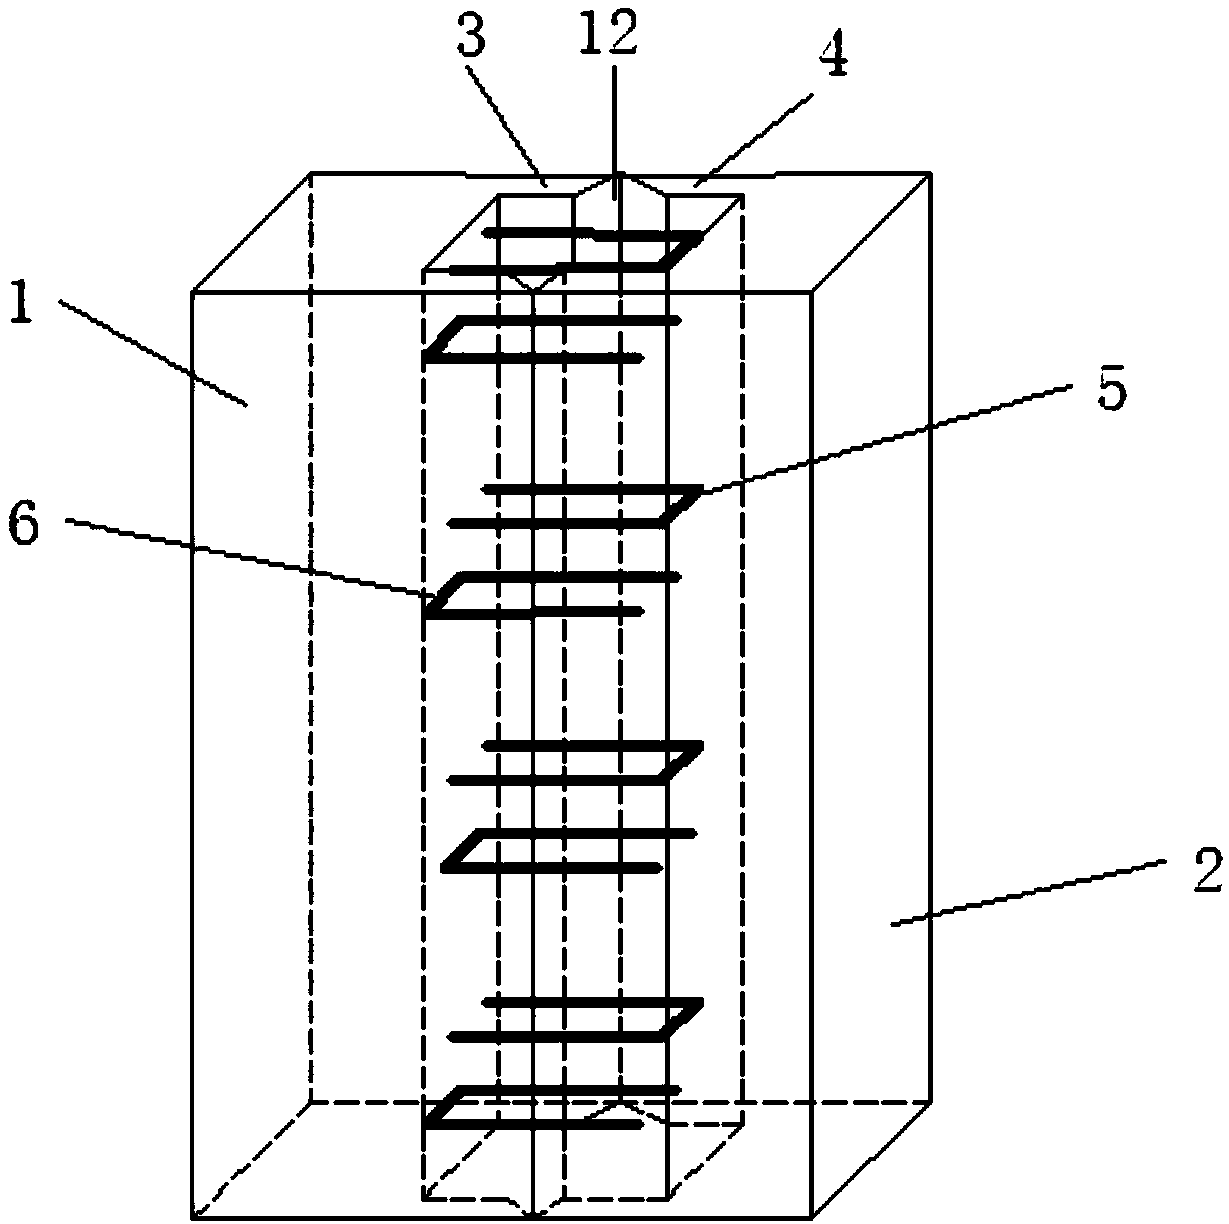 Prefabricated shear wall groove grouting anchor horizontal connection structure